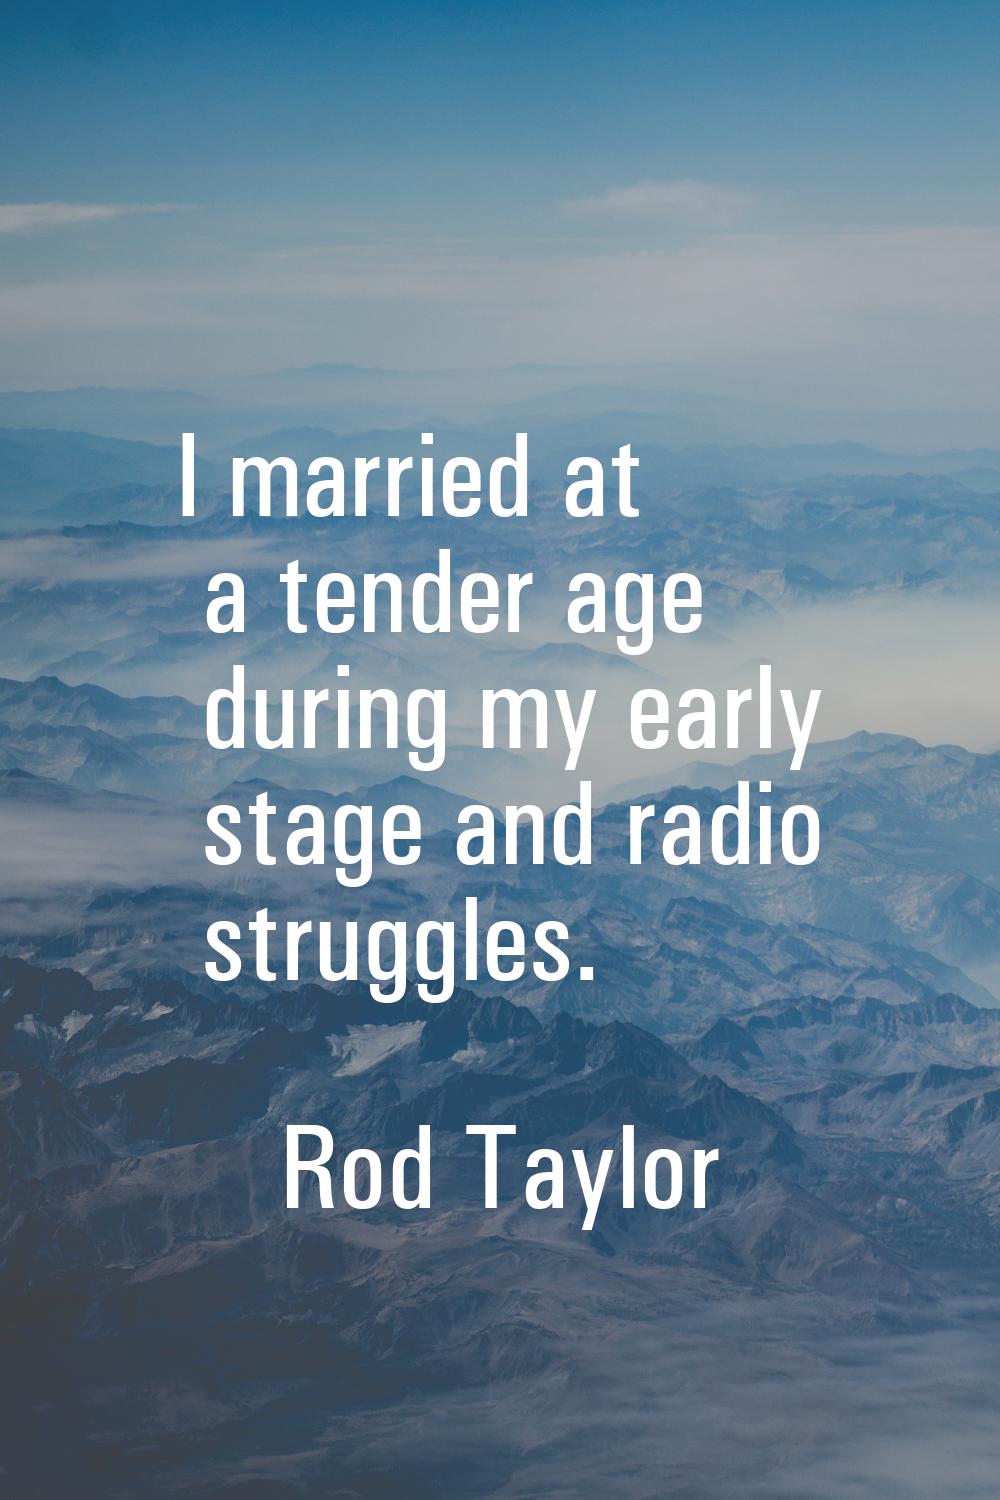 I married at a tender age during my early stage and radio struggles.